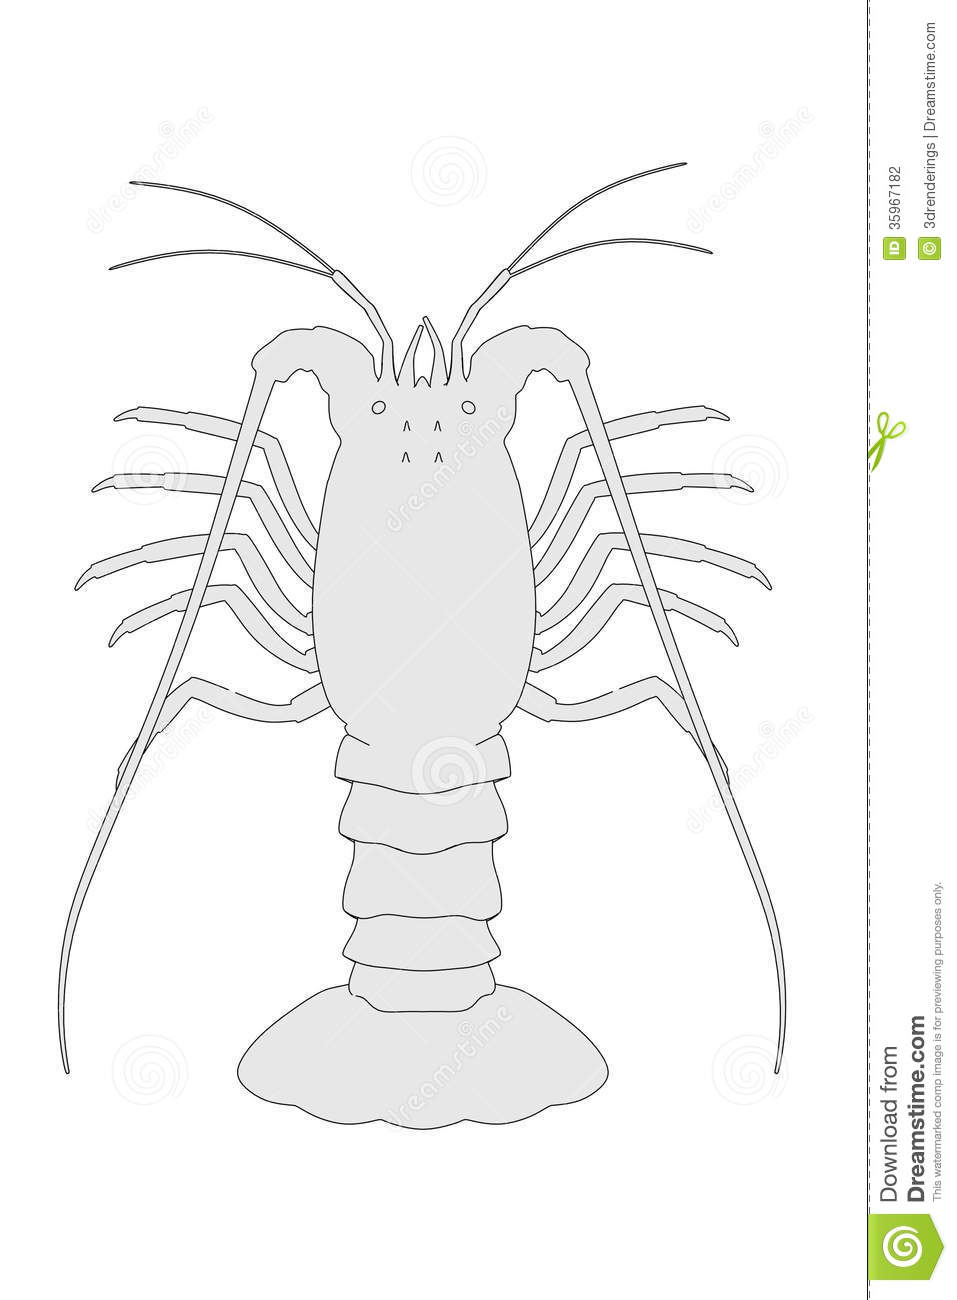 Spiny Lobster clipart #18, Download drawings